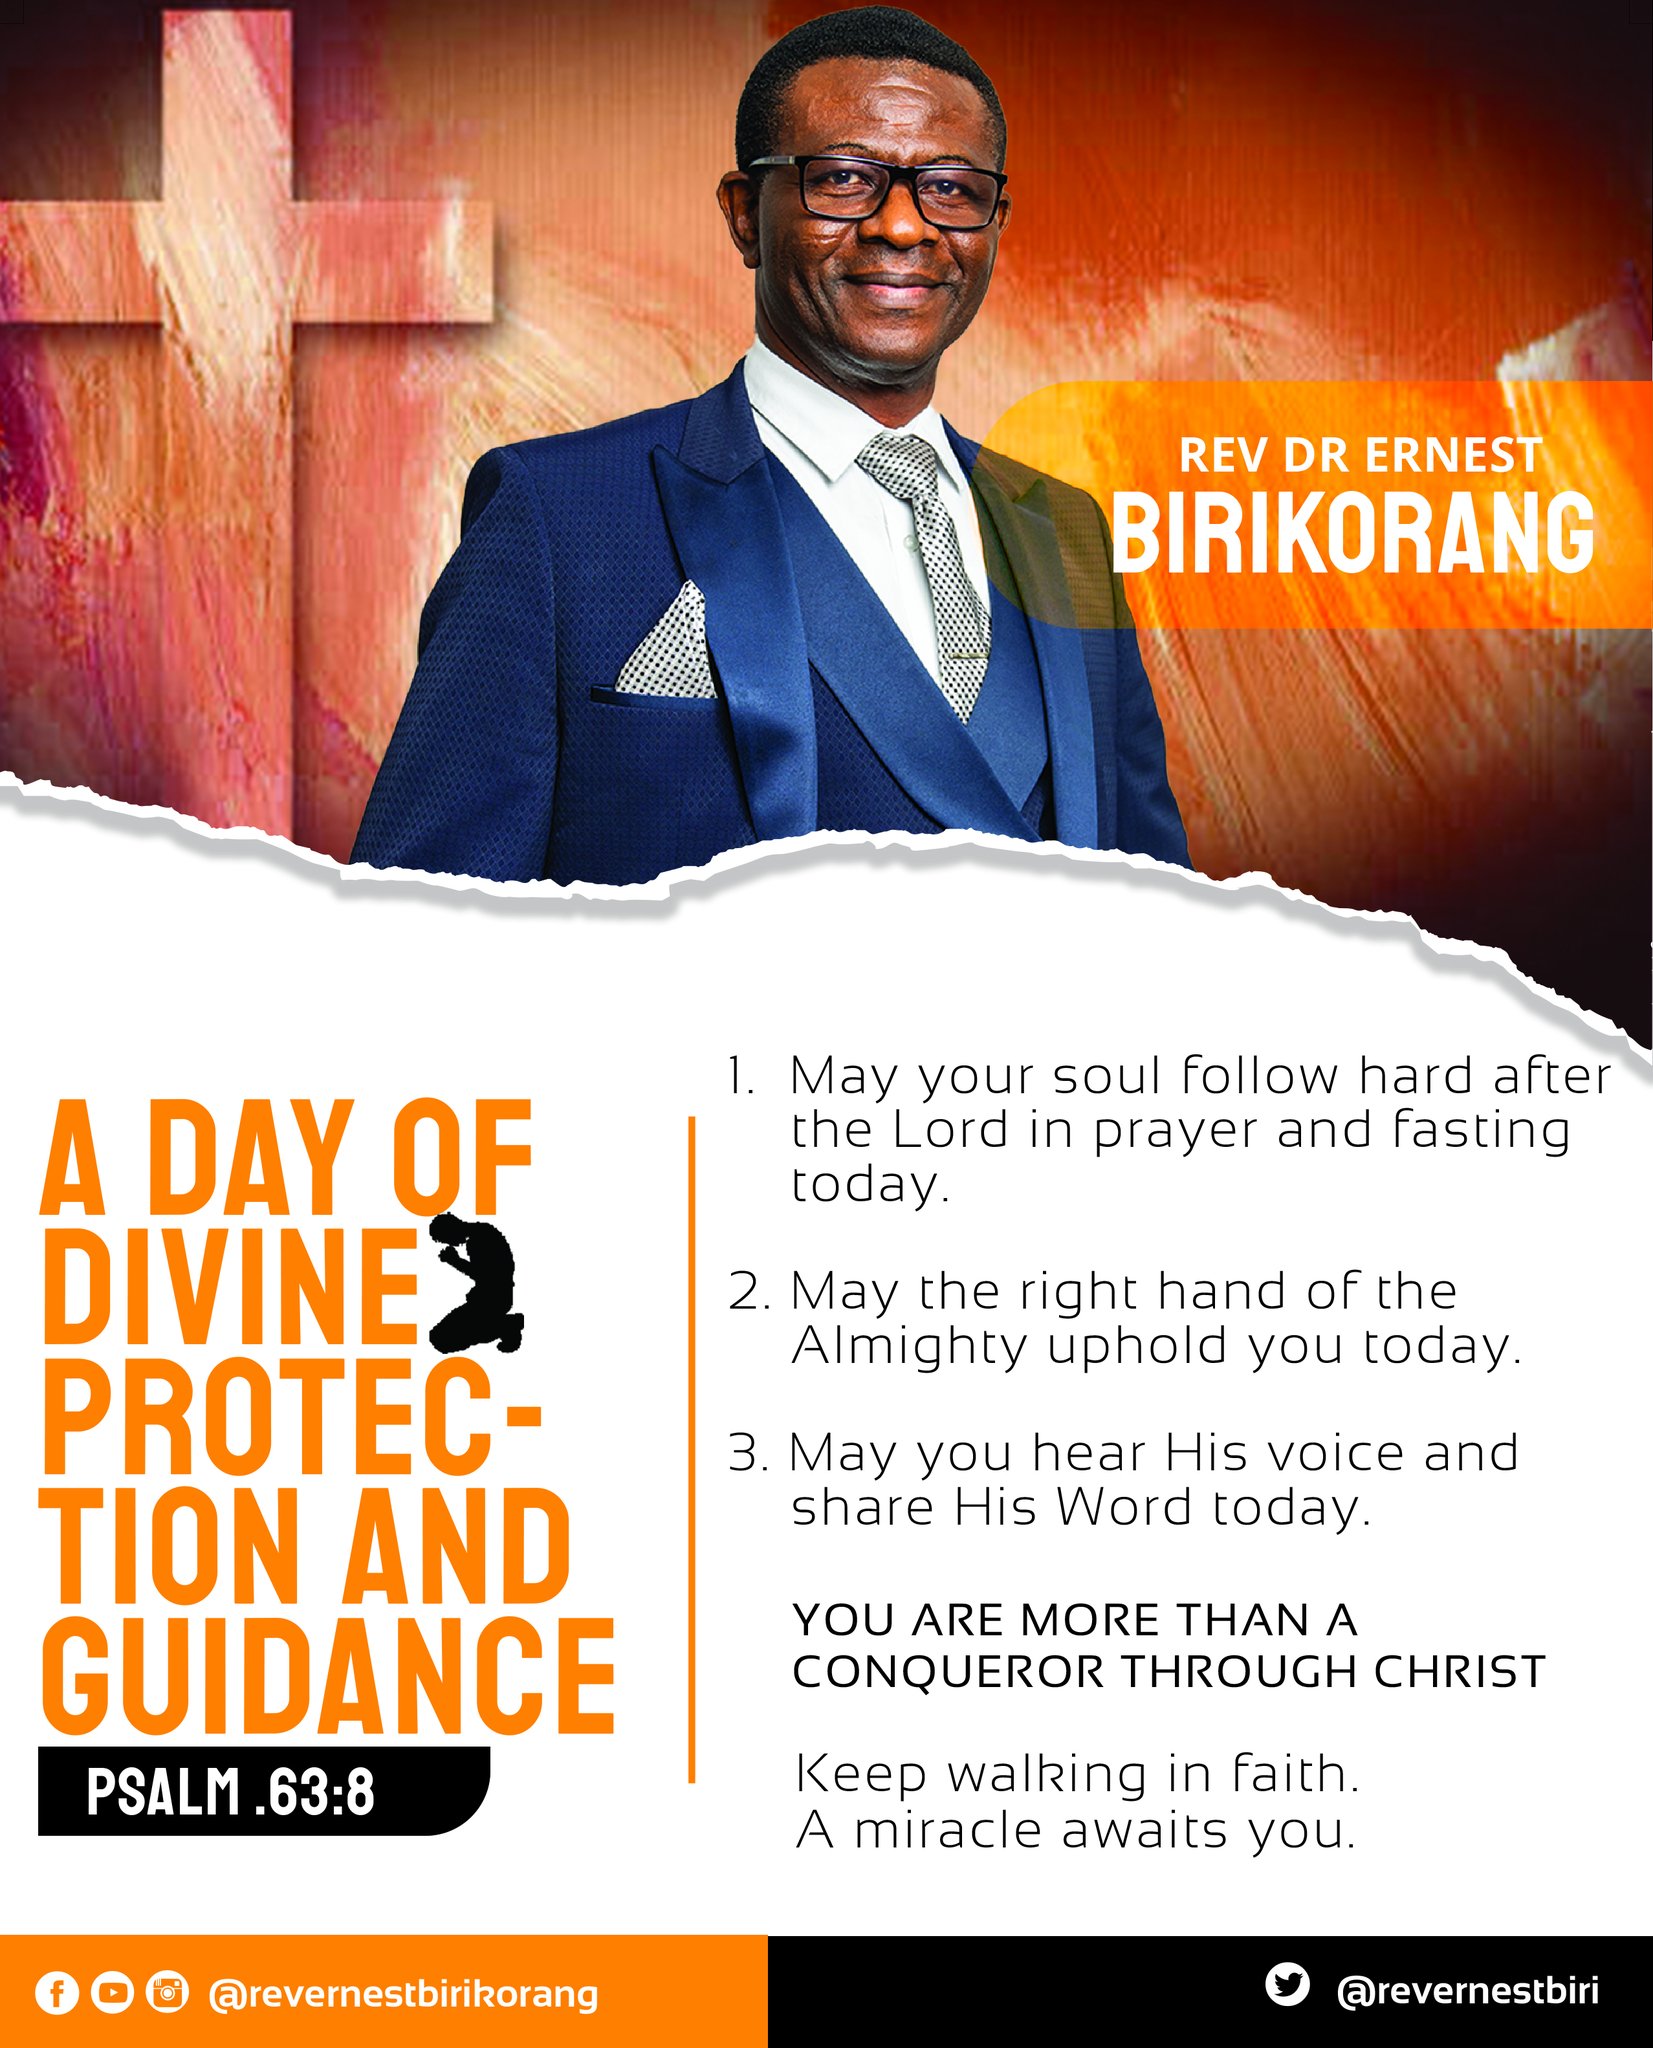 REV DR ERNEST BIRIKORANG May your soul follow hard after A DAY QF the Lord in prayer and fasting today: DIVINEZ 2. May the right hand of the Almighty uphold you today: PROTEC " 3. May you hear His voice and share His Word today. TIon AND YOU ARE MORE THAN A GUDANCE CONQUEROR THROUGH CHRIST PSALM.63.8 Keep walking in faith: A miracle awaits you: 00 @revernestbirkorang @revernestbiri